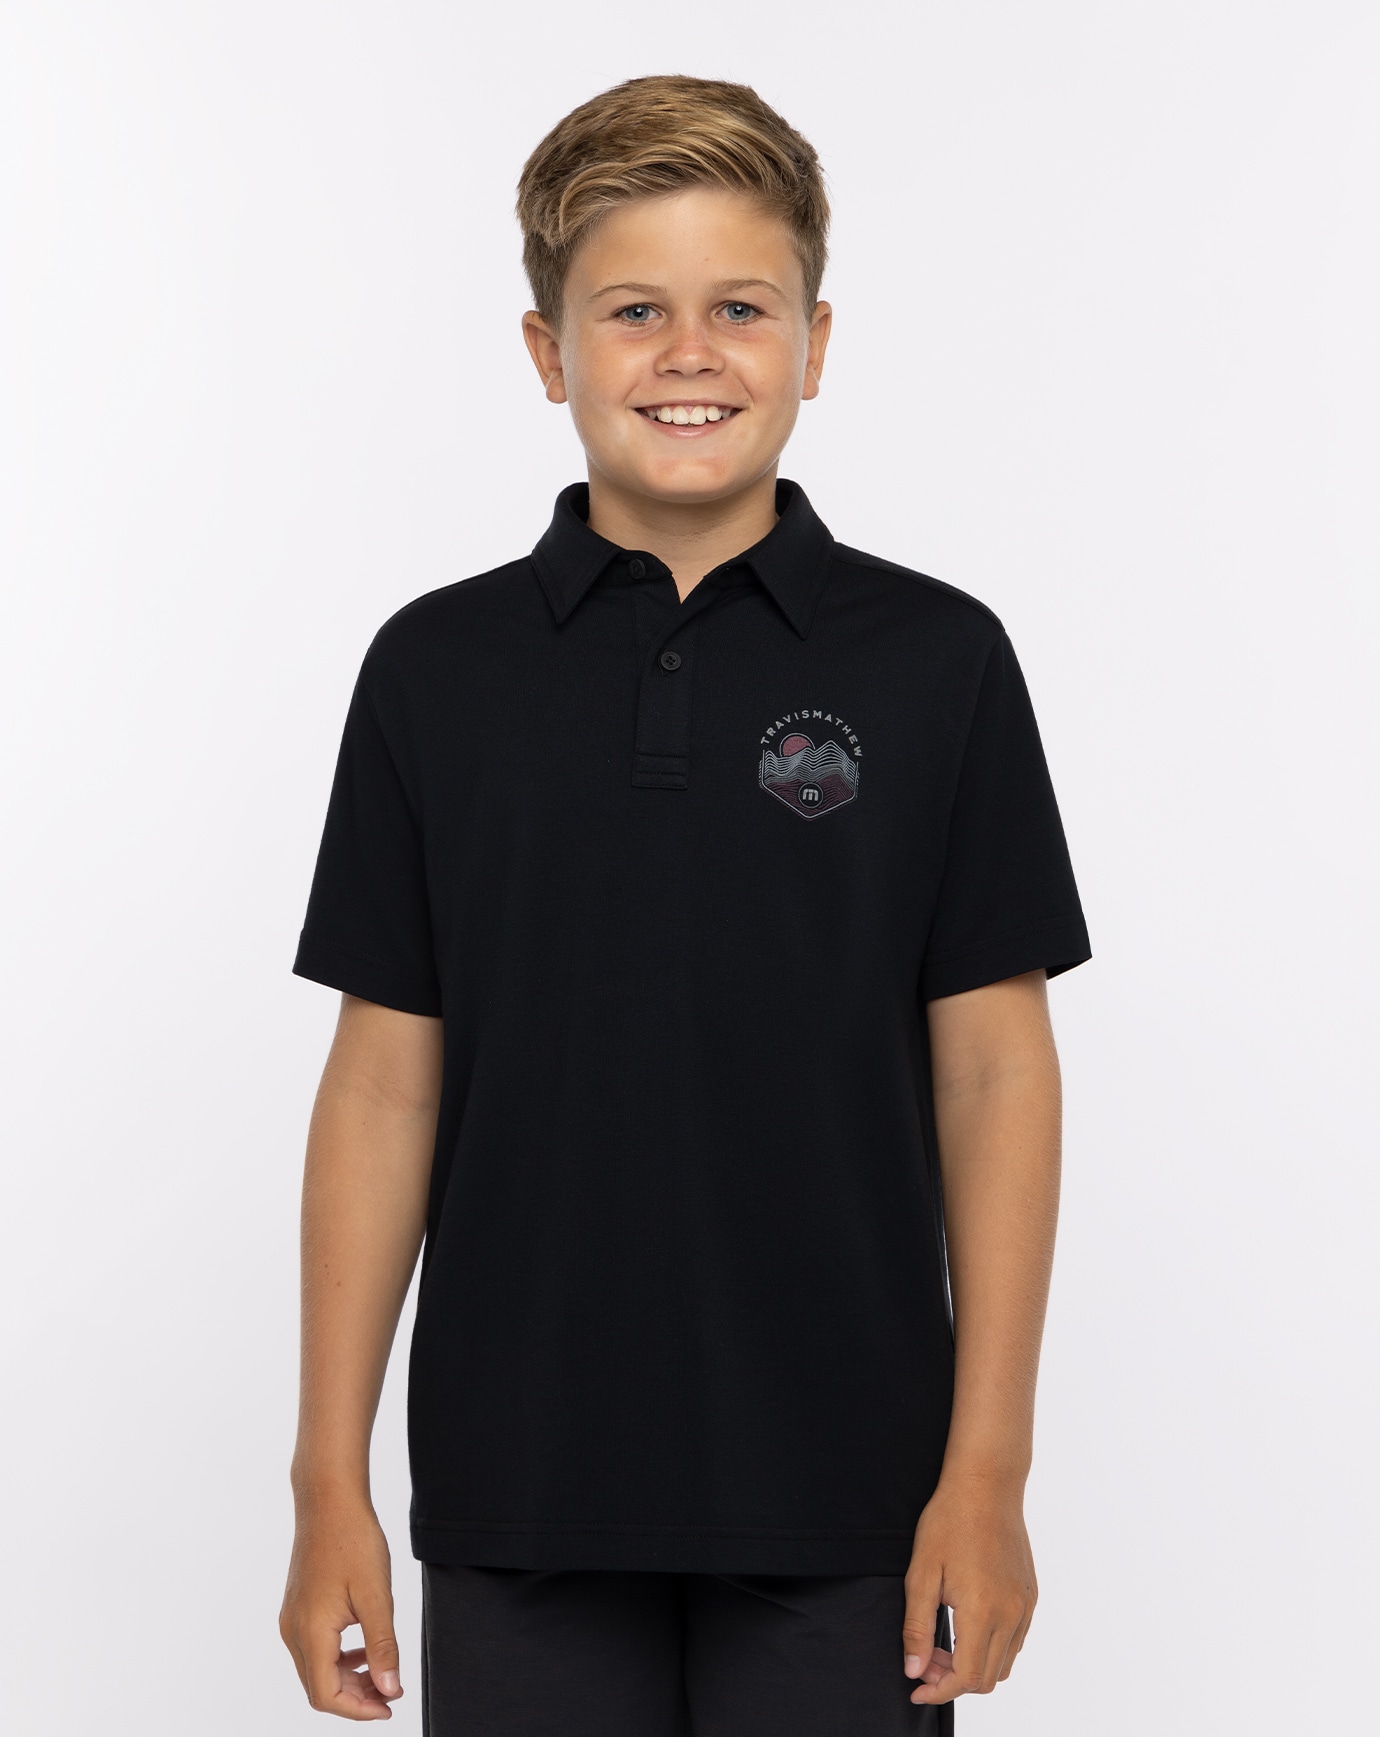 Spelunk Youth Polo